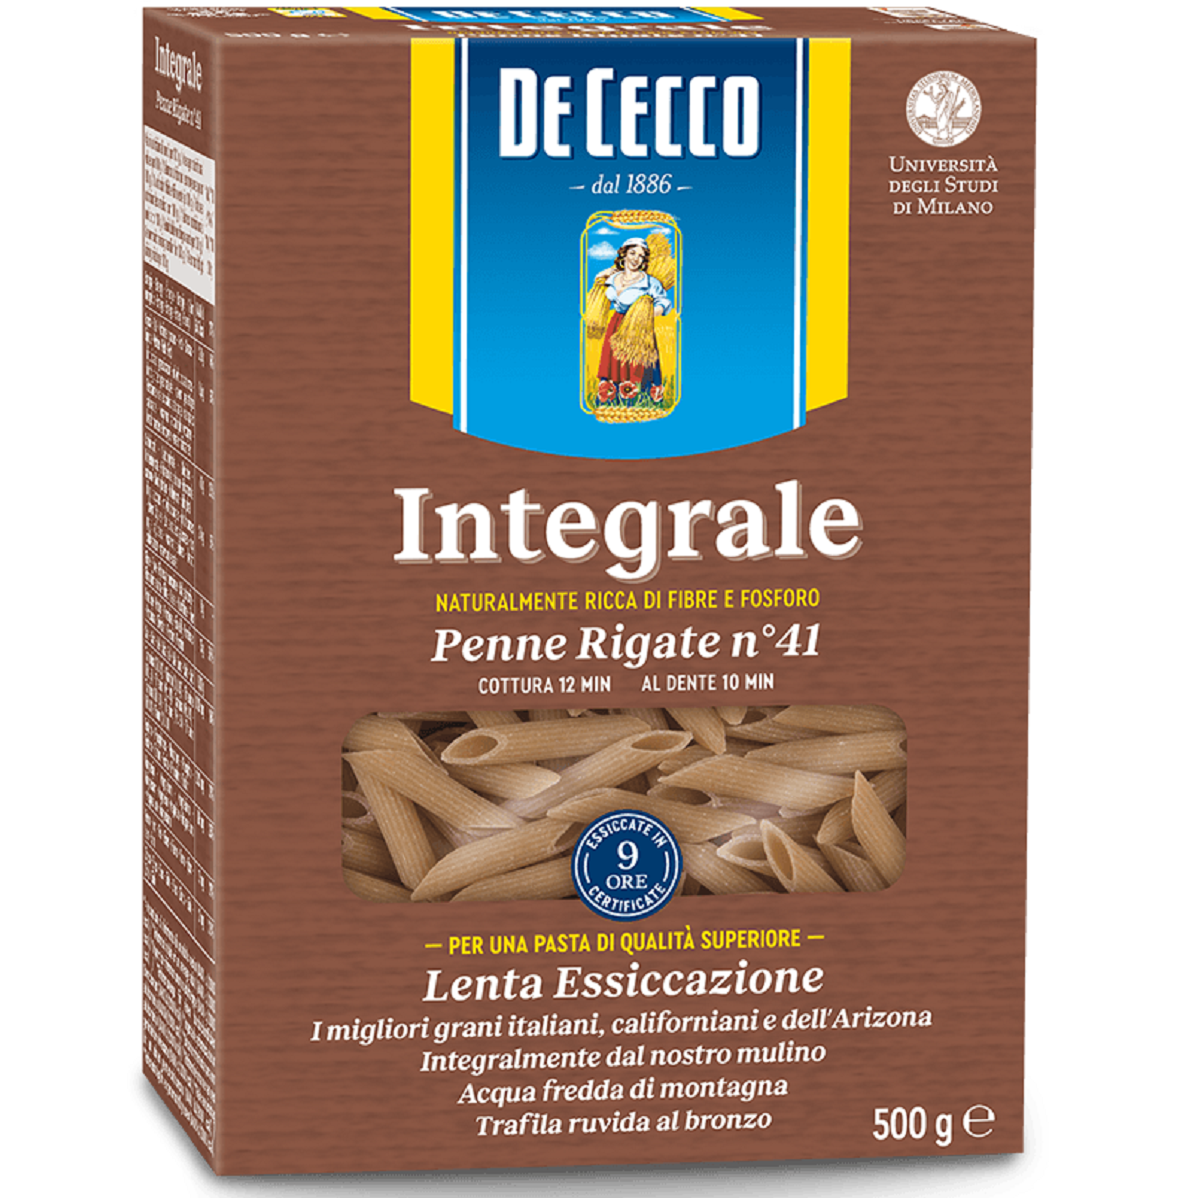 De Cecco Penne Rigate n° 41 Integrali 500g - Ardkeen Quality Food Store